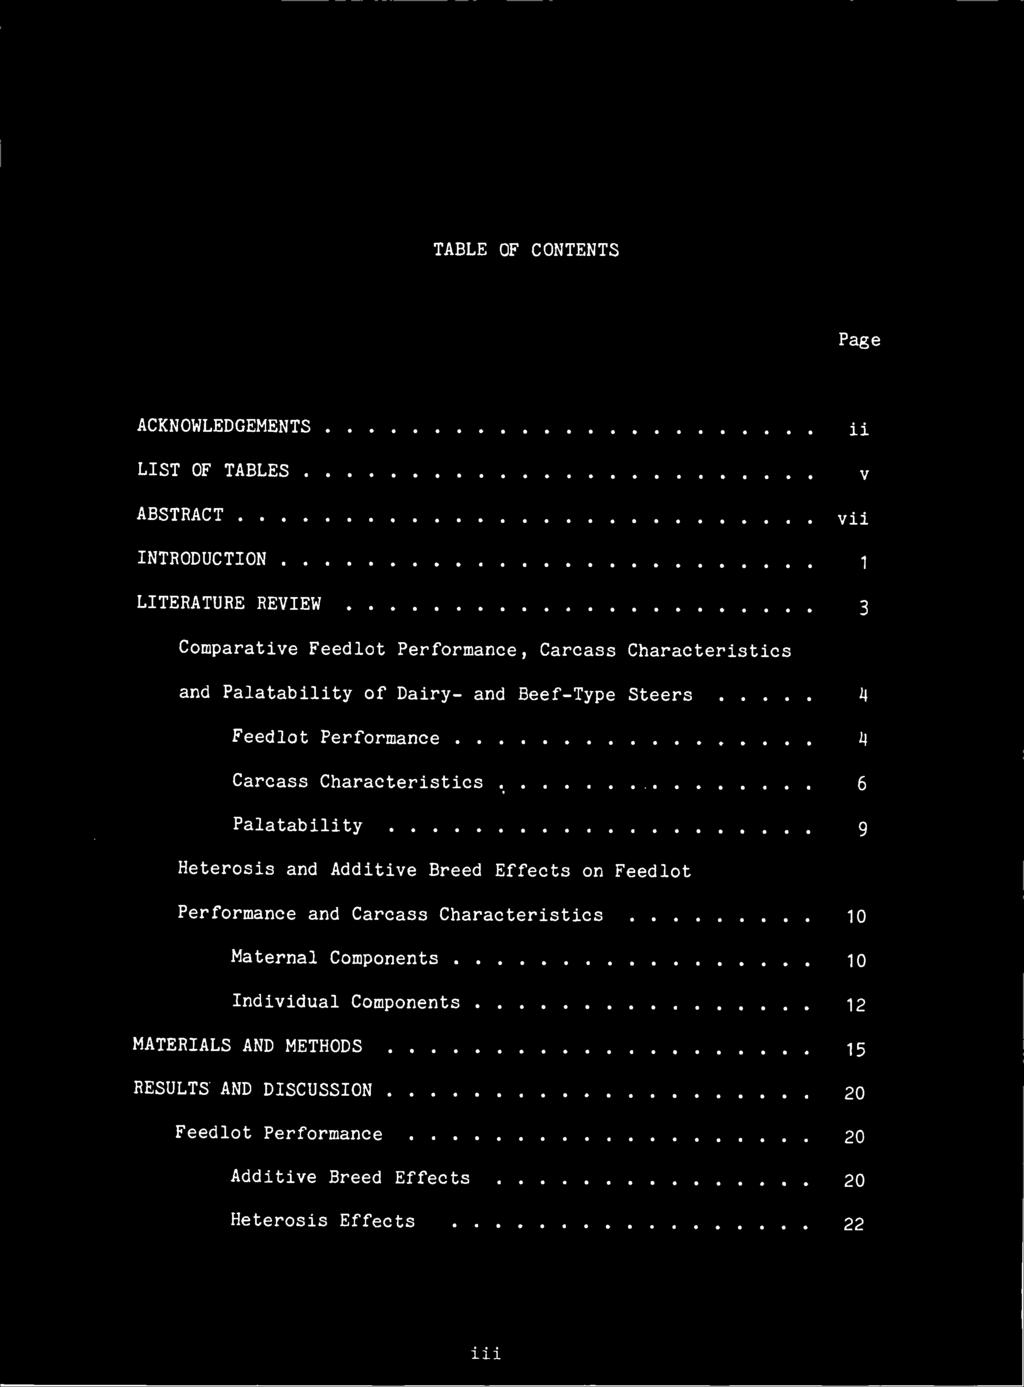 TABLE OF CONTENTS Page ACKNOWLEDGEMENTS 11 LIST OF TABLES v ABSTRACT vii INTRODUCTION 1 LITERATURE REVIEW 3 Comparative Feedlot Performance, Carcass Characteristics and Palatability of Dairy- and